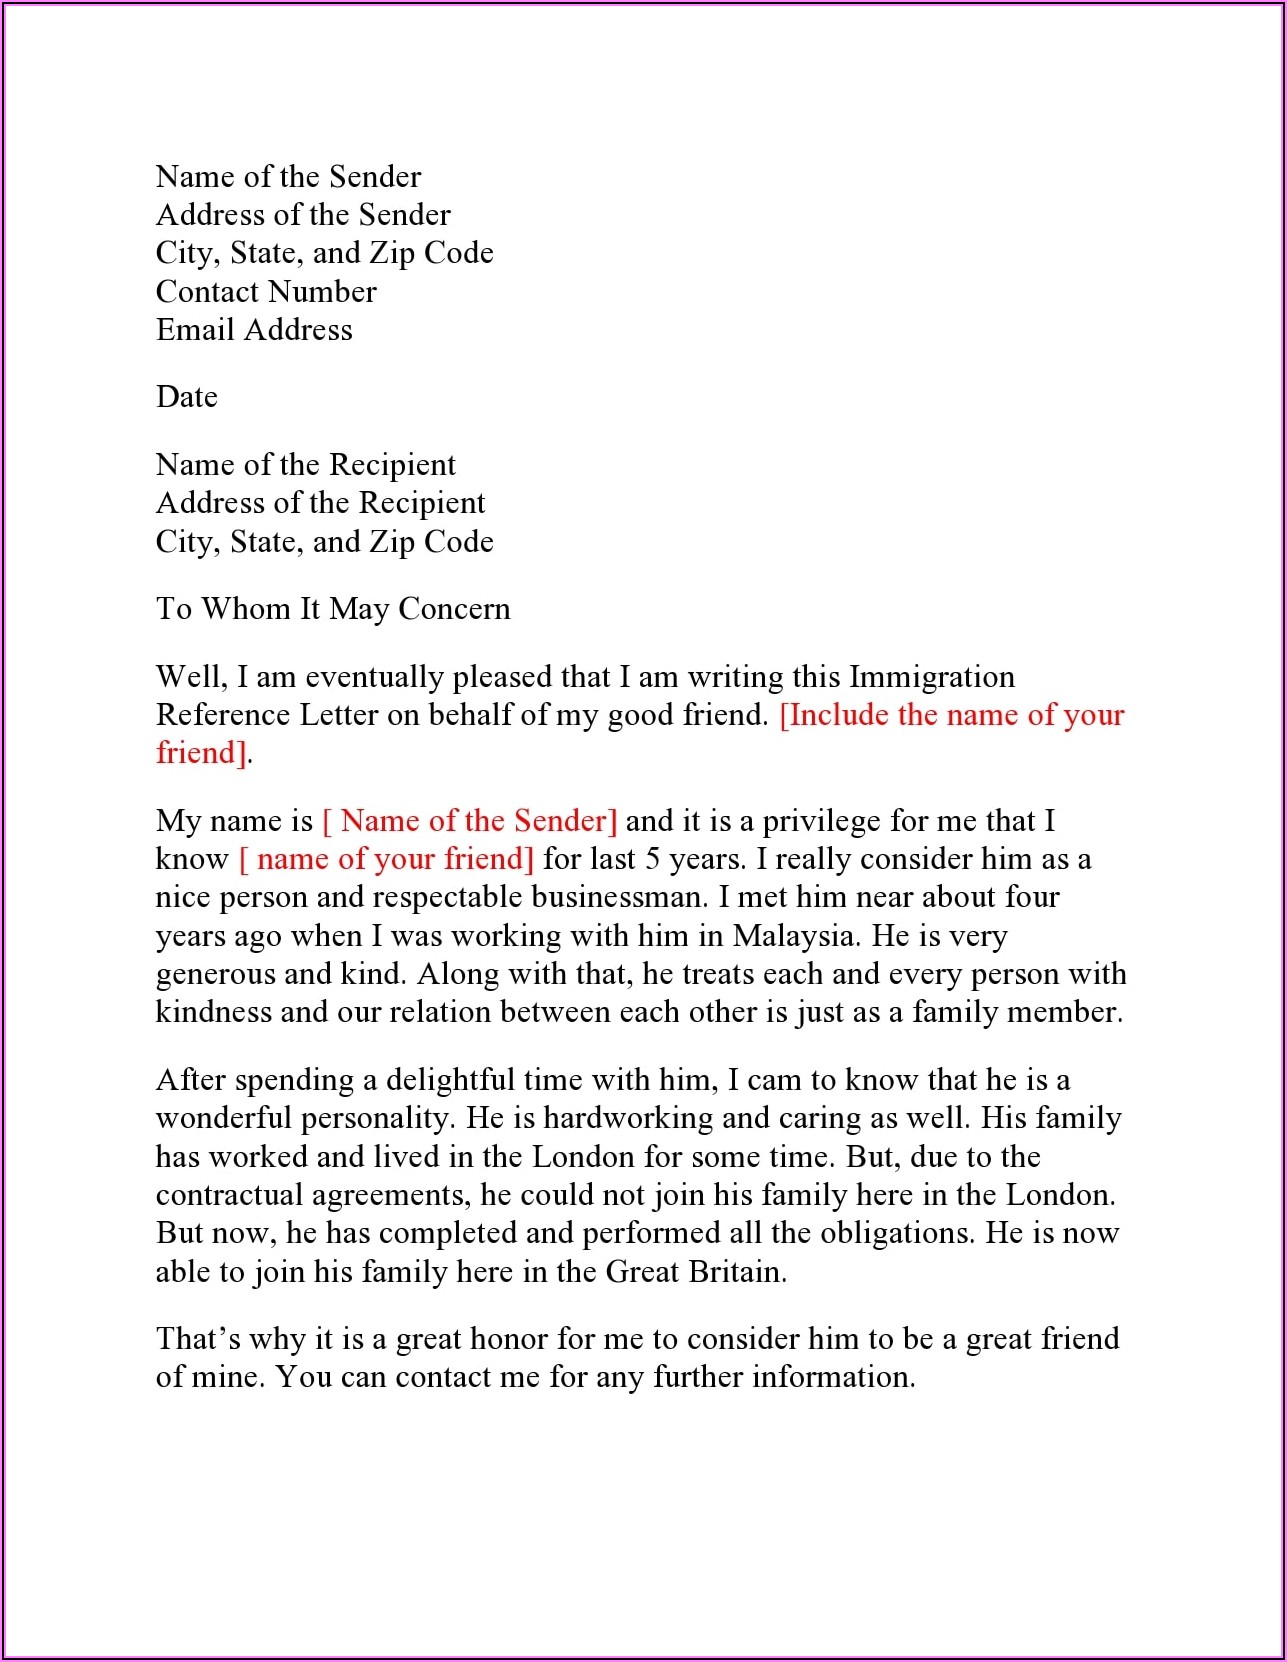 Sample Character Reference Letter For A Friend For Immigration Uk